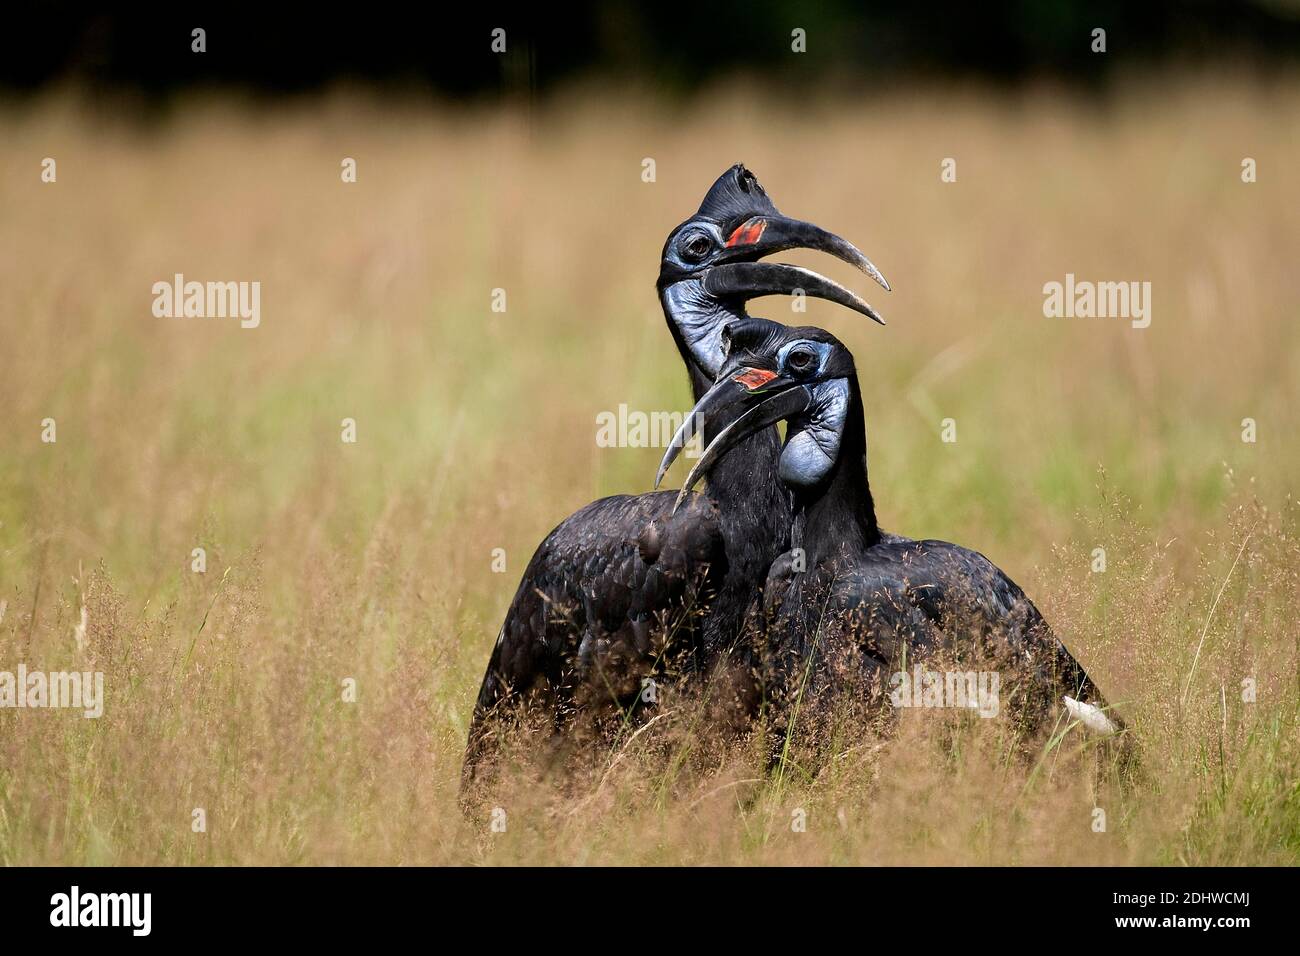 Abyssian Ground Hornbill ou Northern Ground Hornbill, bucorvus abyssinicus Banque D'Images